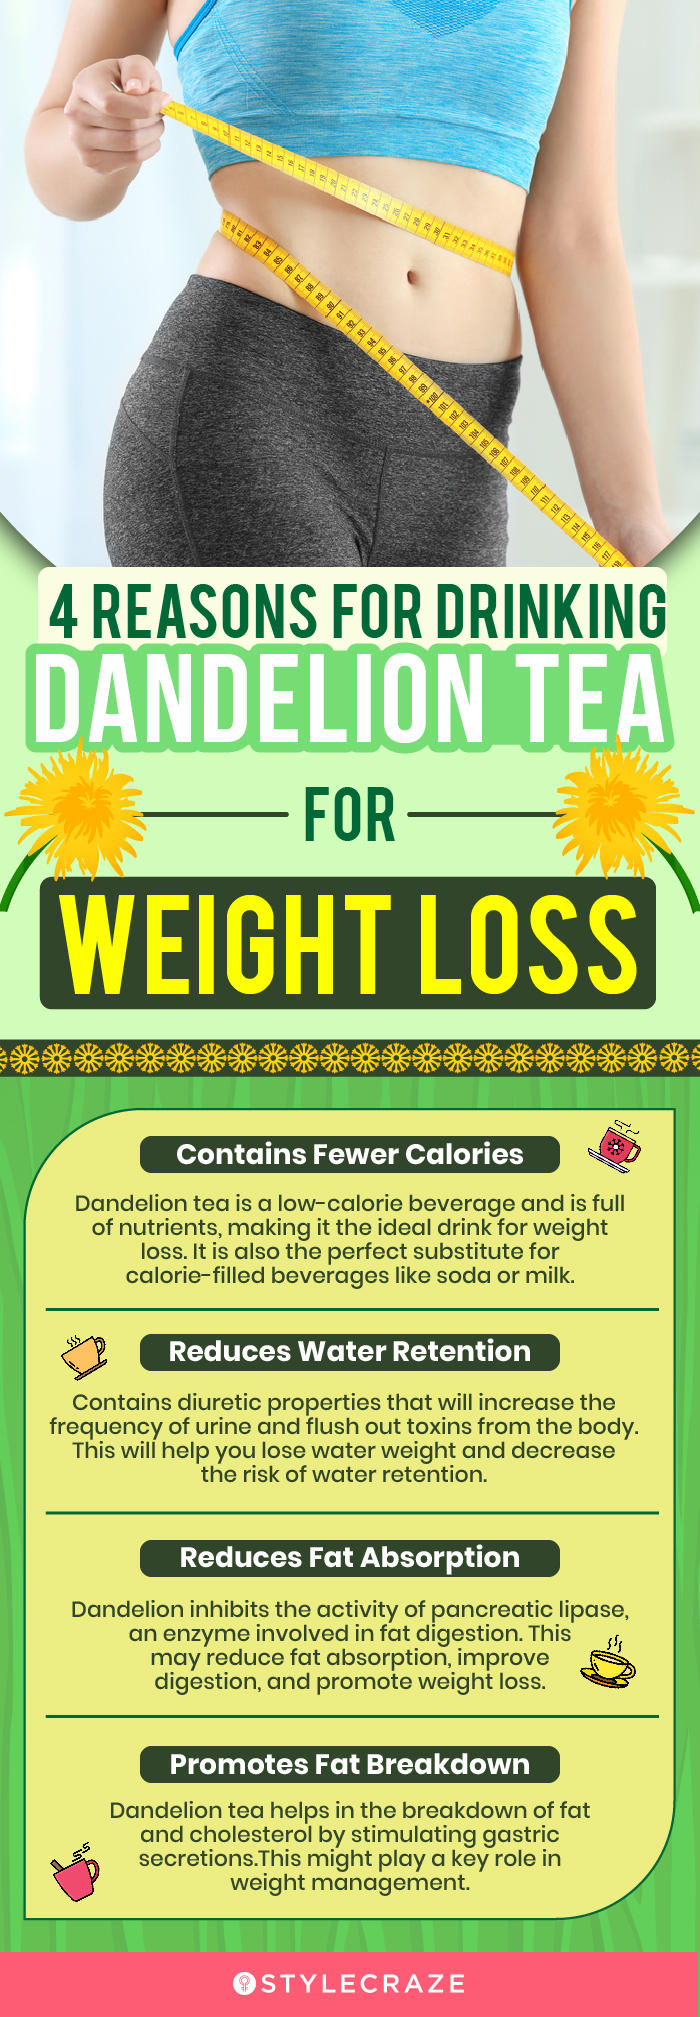 4 reasons for drinking dandelion tea for weight loss (infographic)